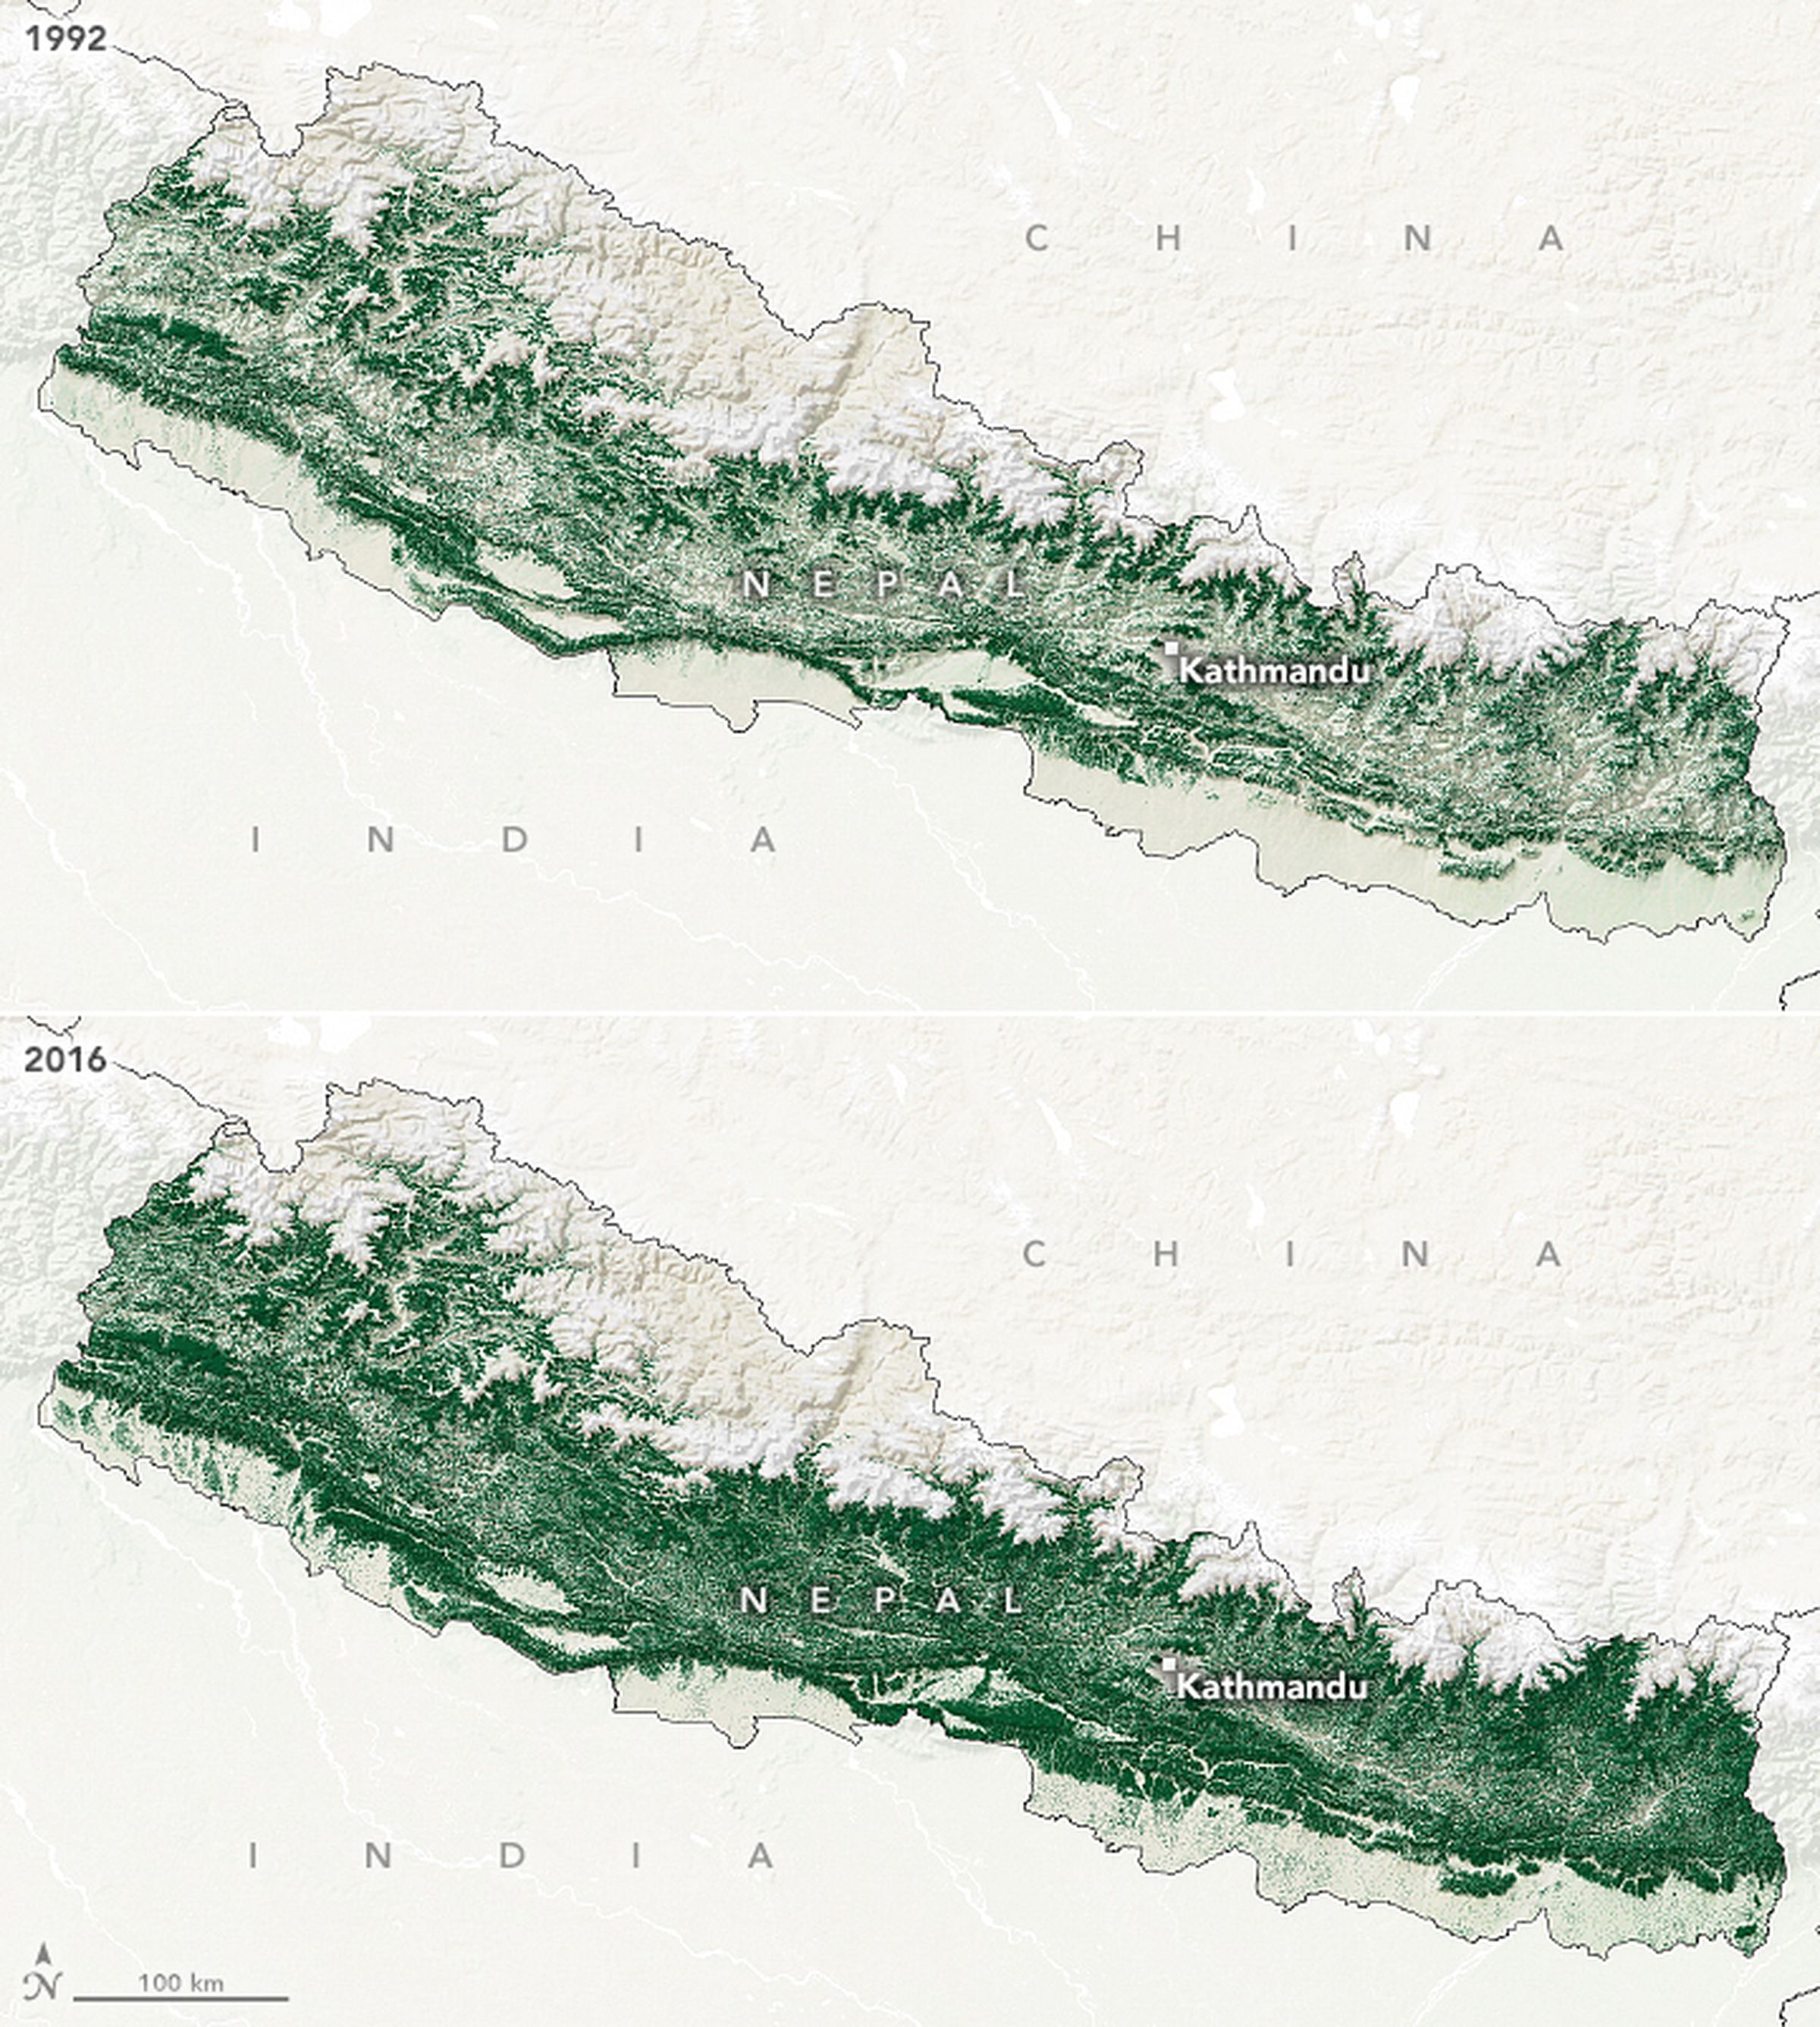 A map at the top shows Nepal shaded in light green, indicating little forest in 1992.  A map below shows the land colored dark green, indicating more forest in 2016.